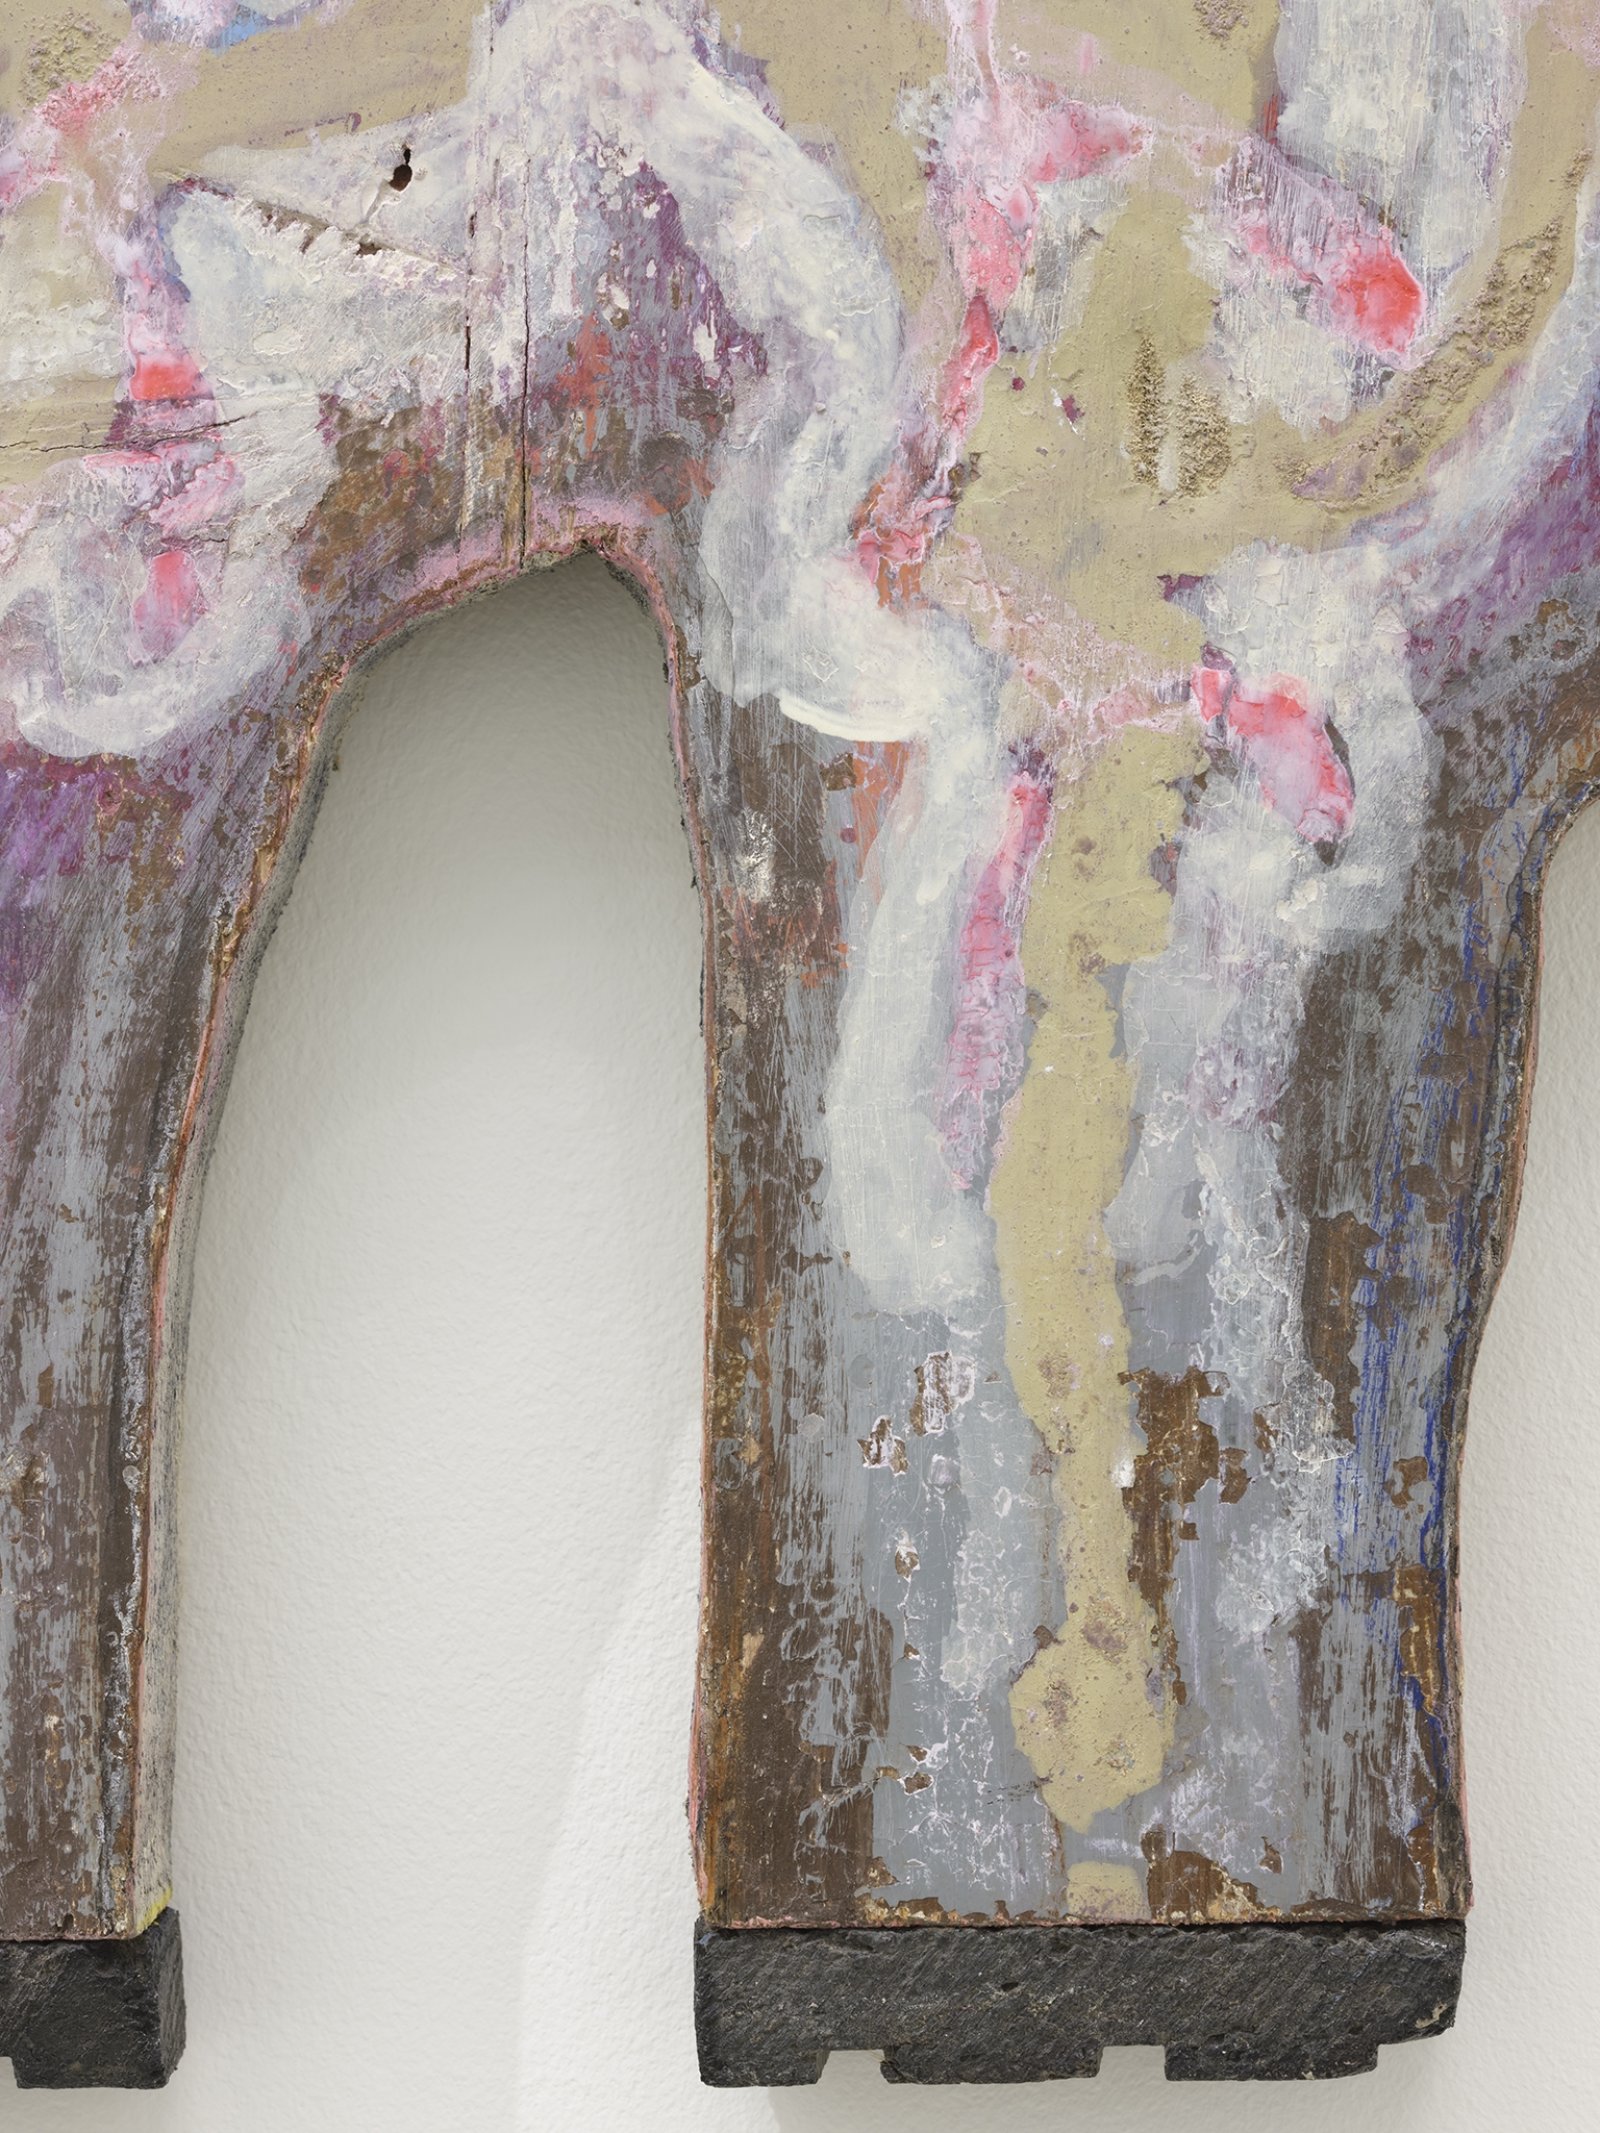 Ashes Withyman, Mountain Toad sitting in the hollow of a rotting tree (detail), 2019, found wood, previously frozen paint, coloured pencil, rubber, 18 x 11 in. (46 x 28 cm)